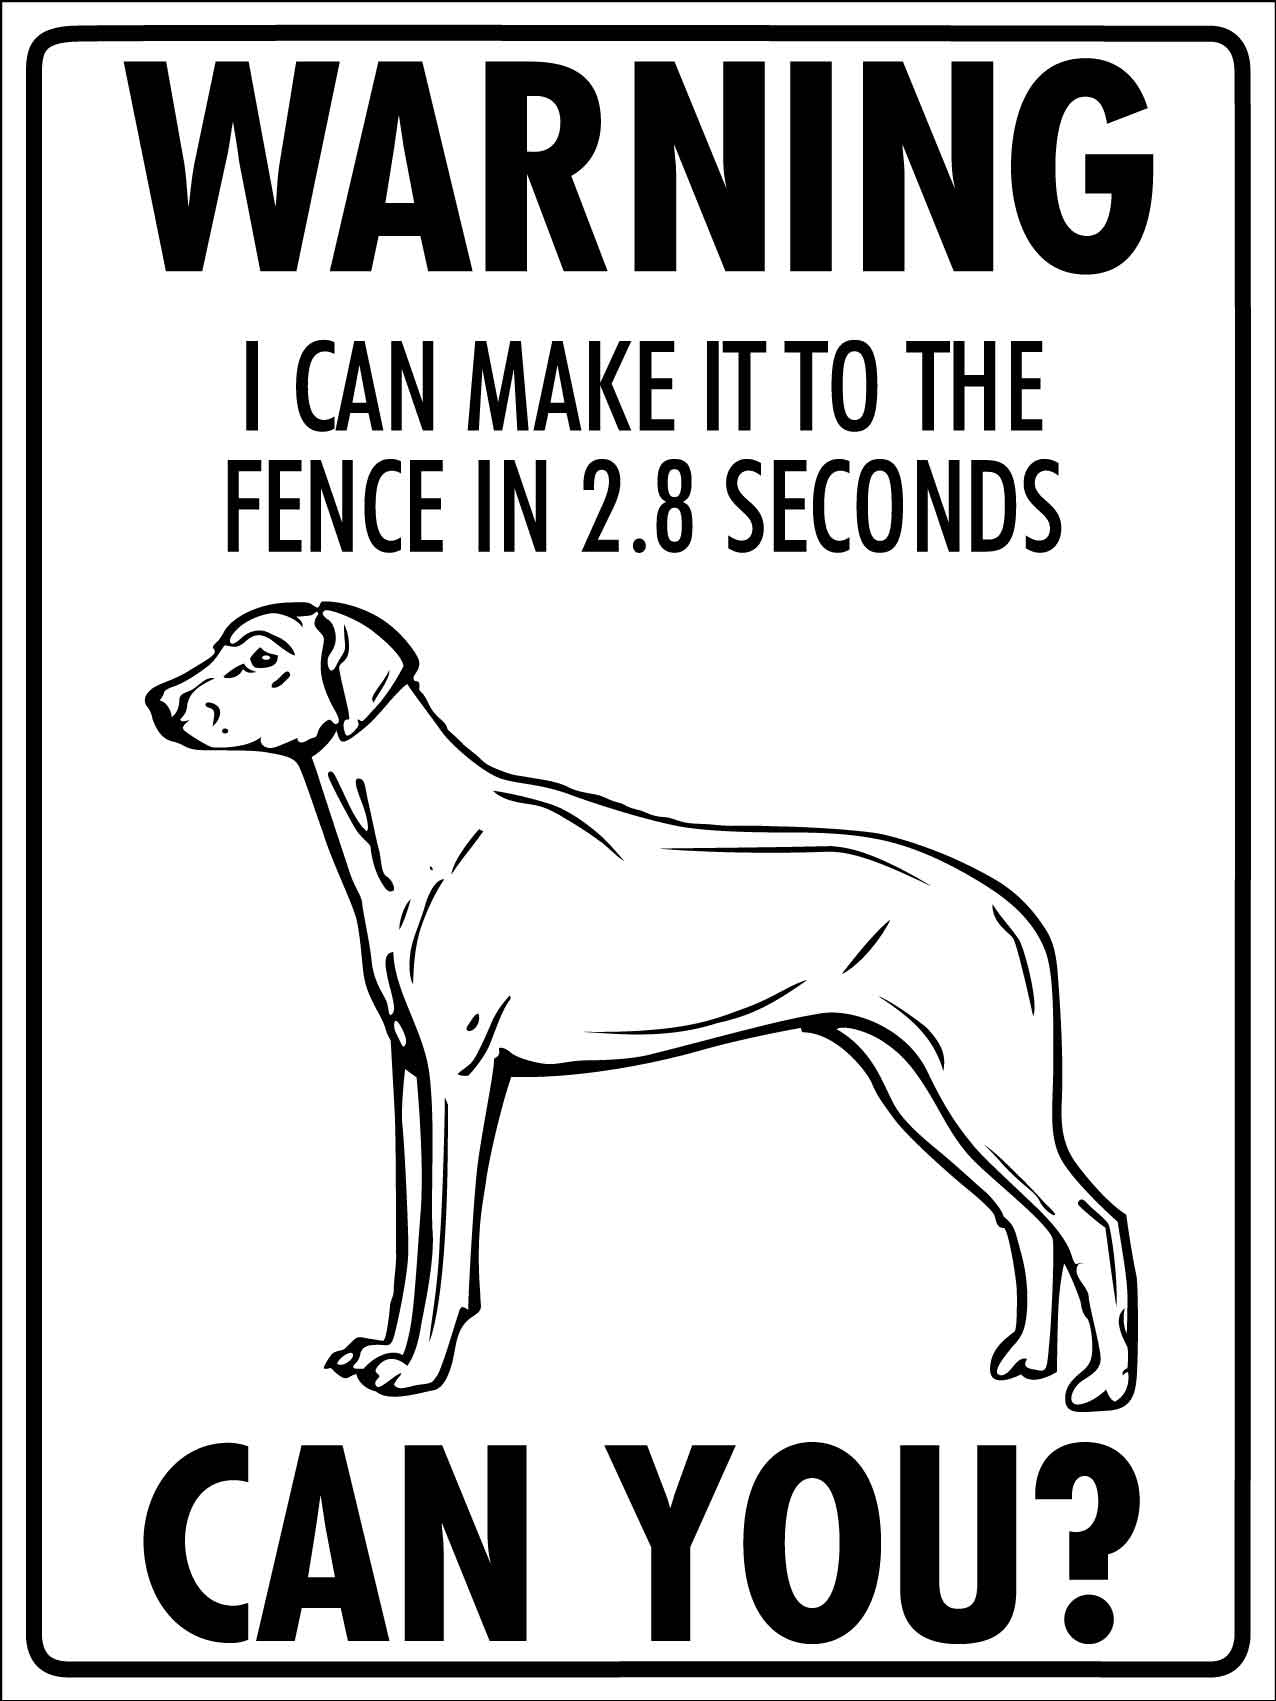 Warning I Can Make It To The Fence In 2.8 Seconds Can You Ridgeback Sign